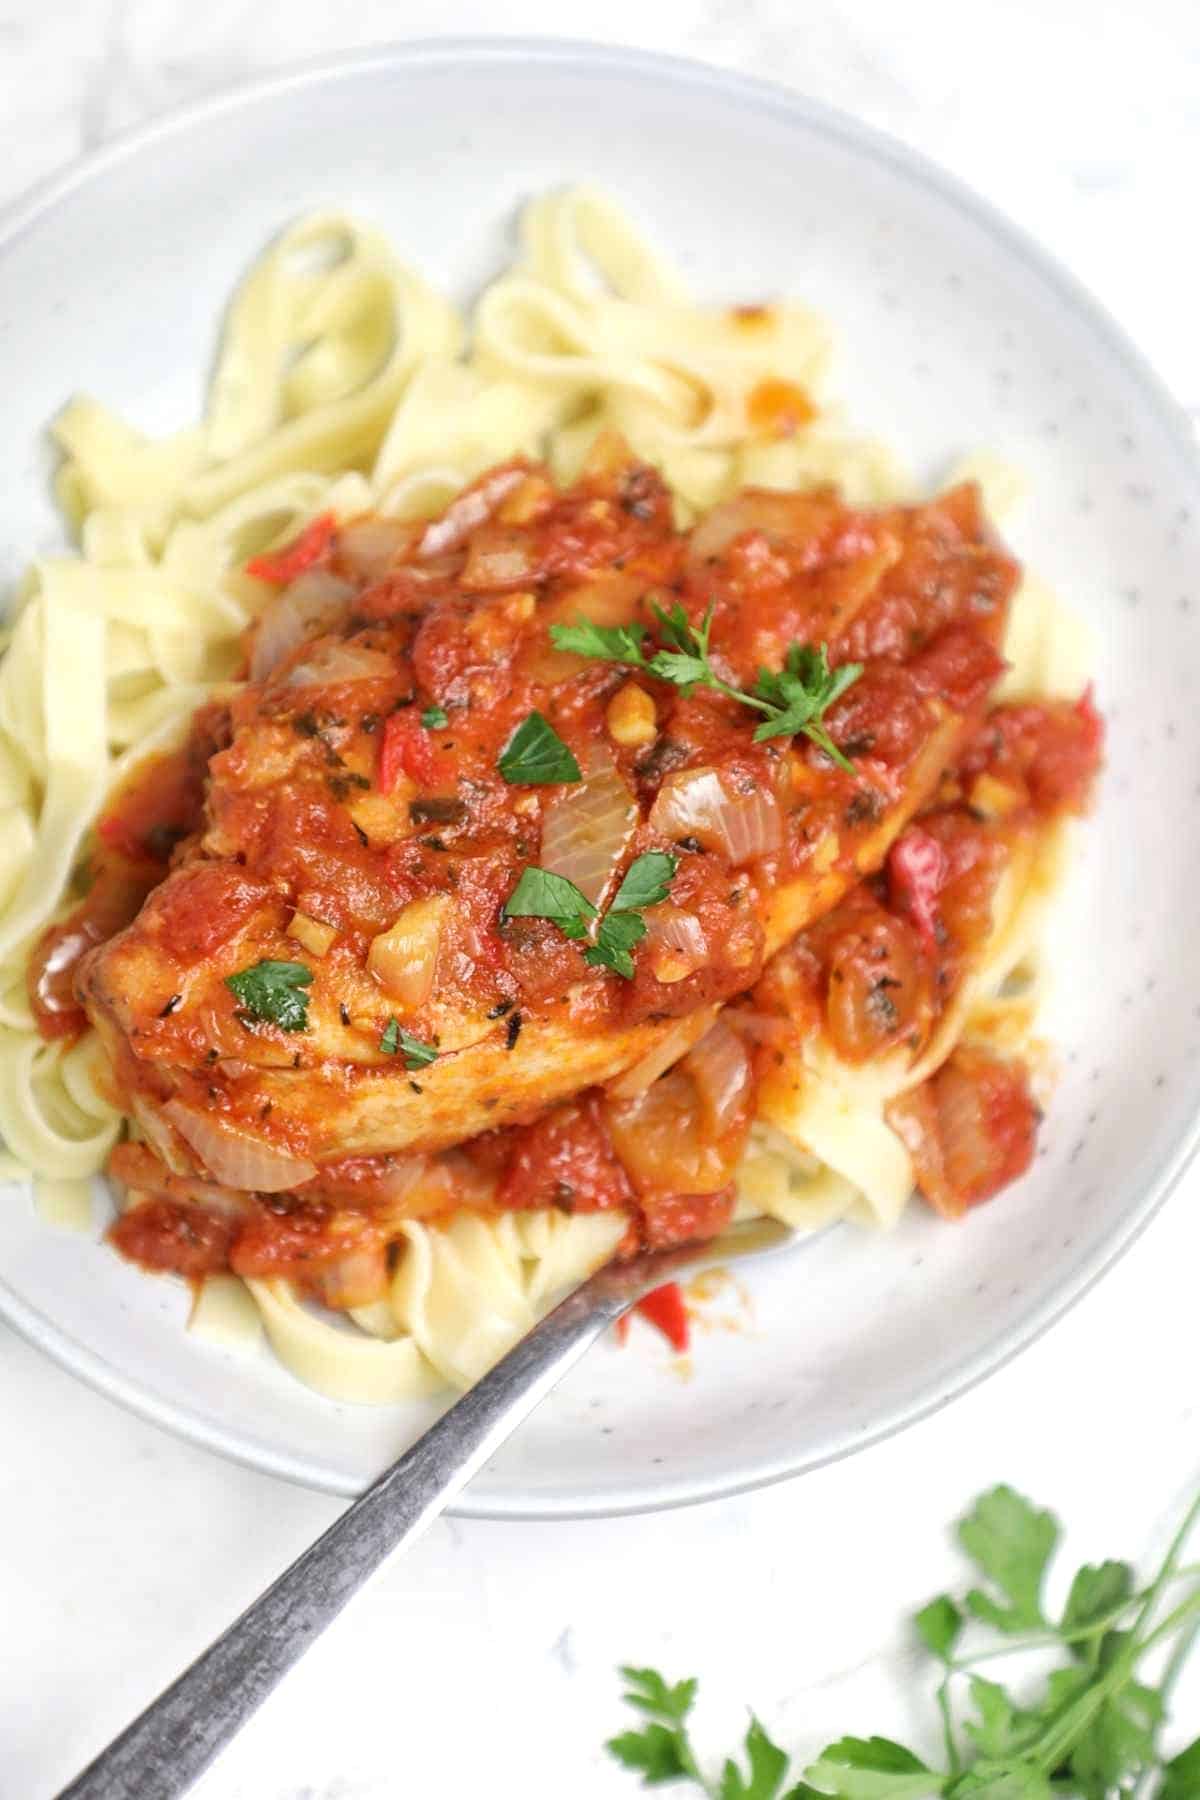 Chicken breast with tomato sauce served on on pasta.